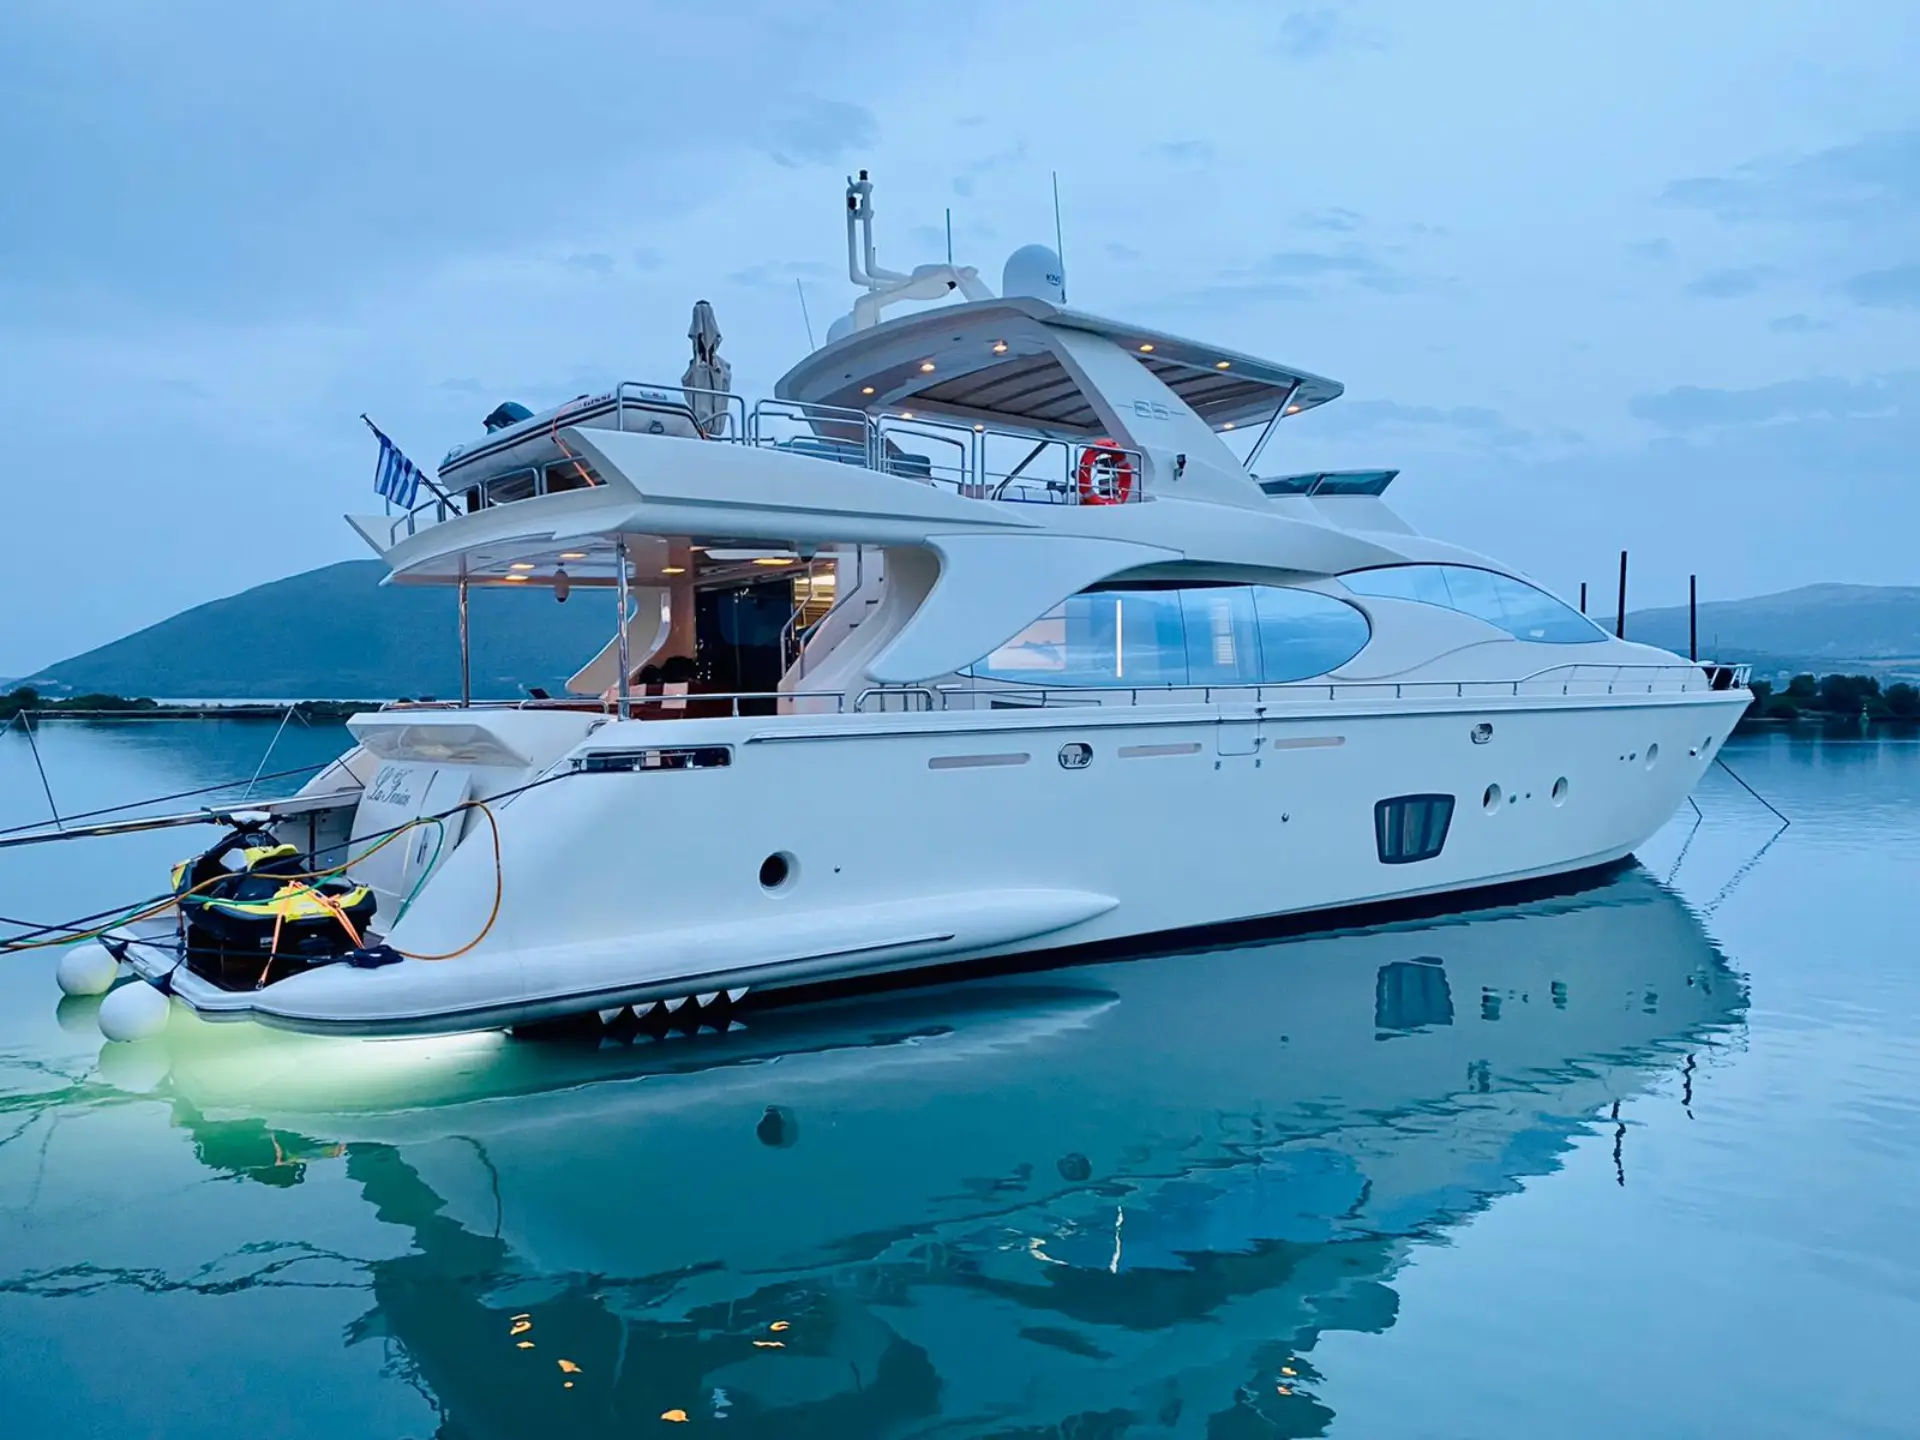 Corfu Paxos-Antipaxos Private Cruise with an Azimut 85ft Golden Yachting and Sailing